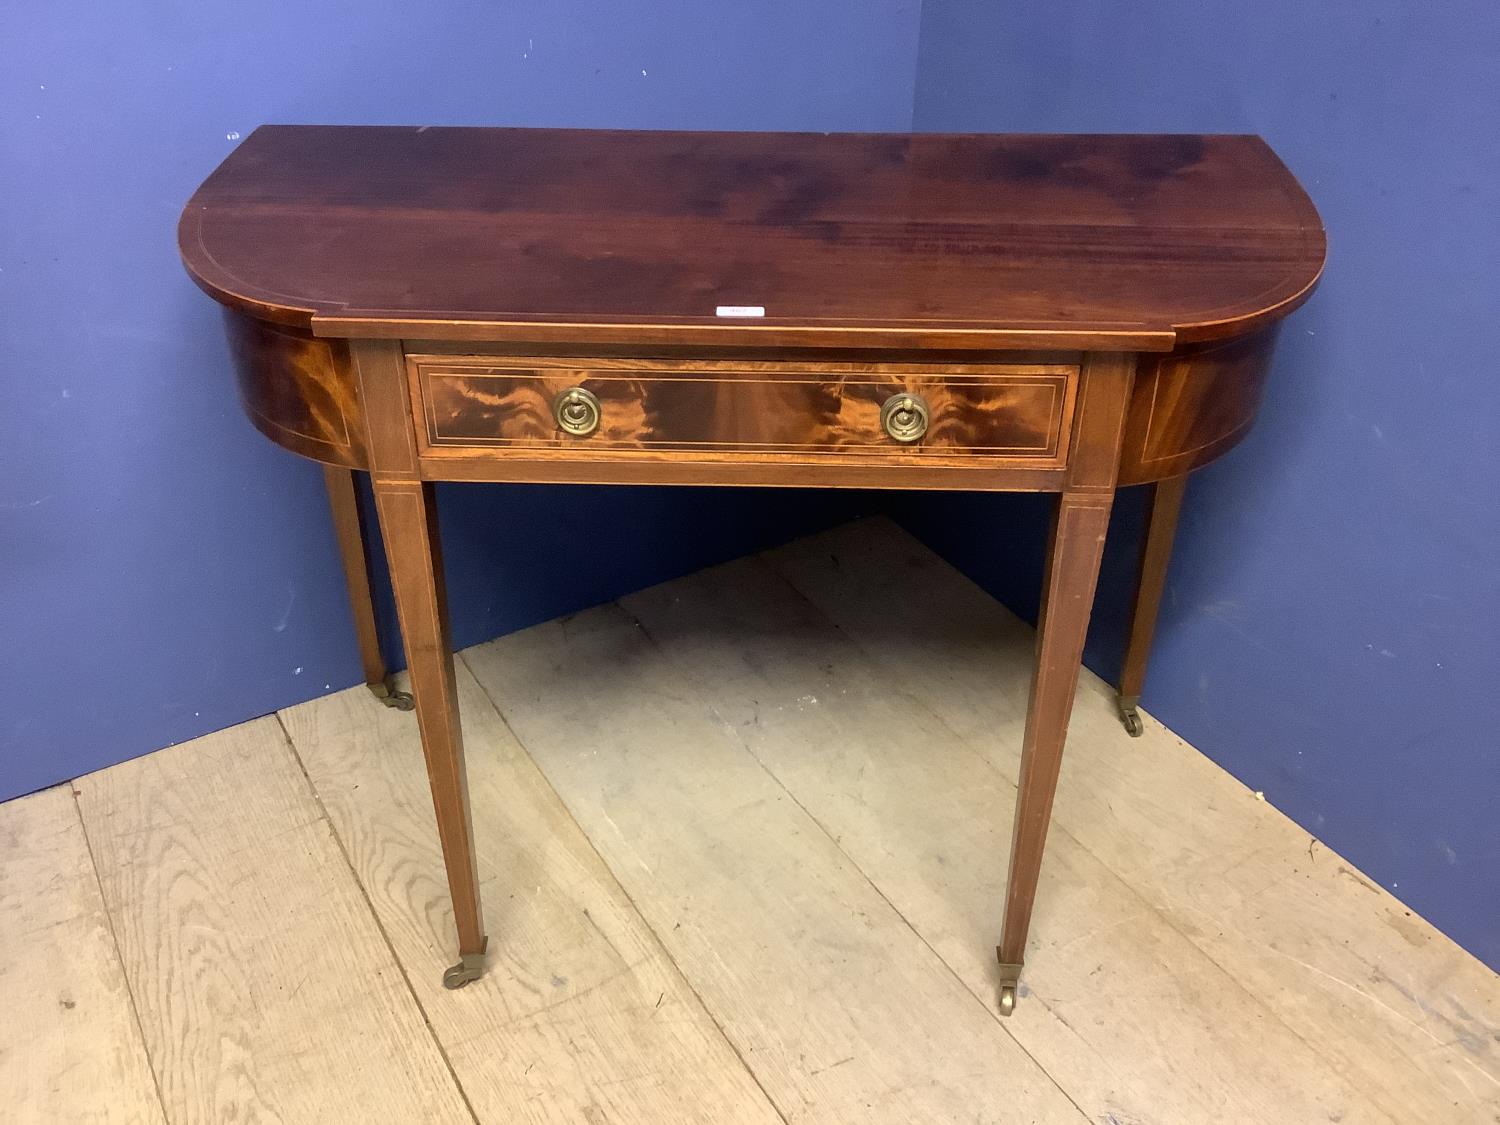 Inlaid mahogany side table with single drawer, 76h x 106w x 53d cm. - Image 2 of 3